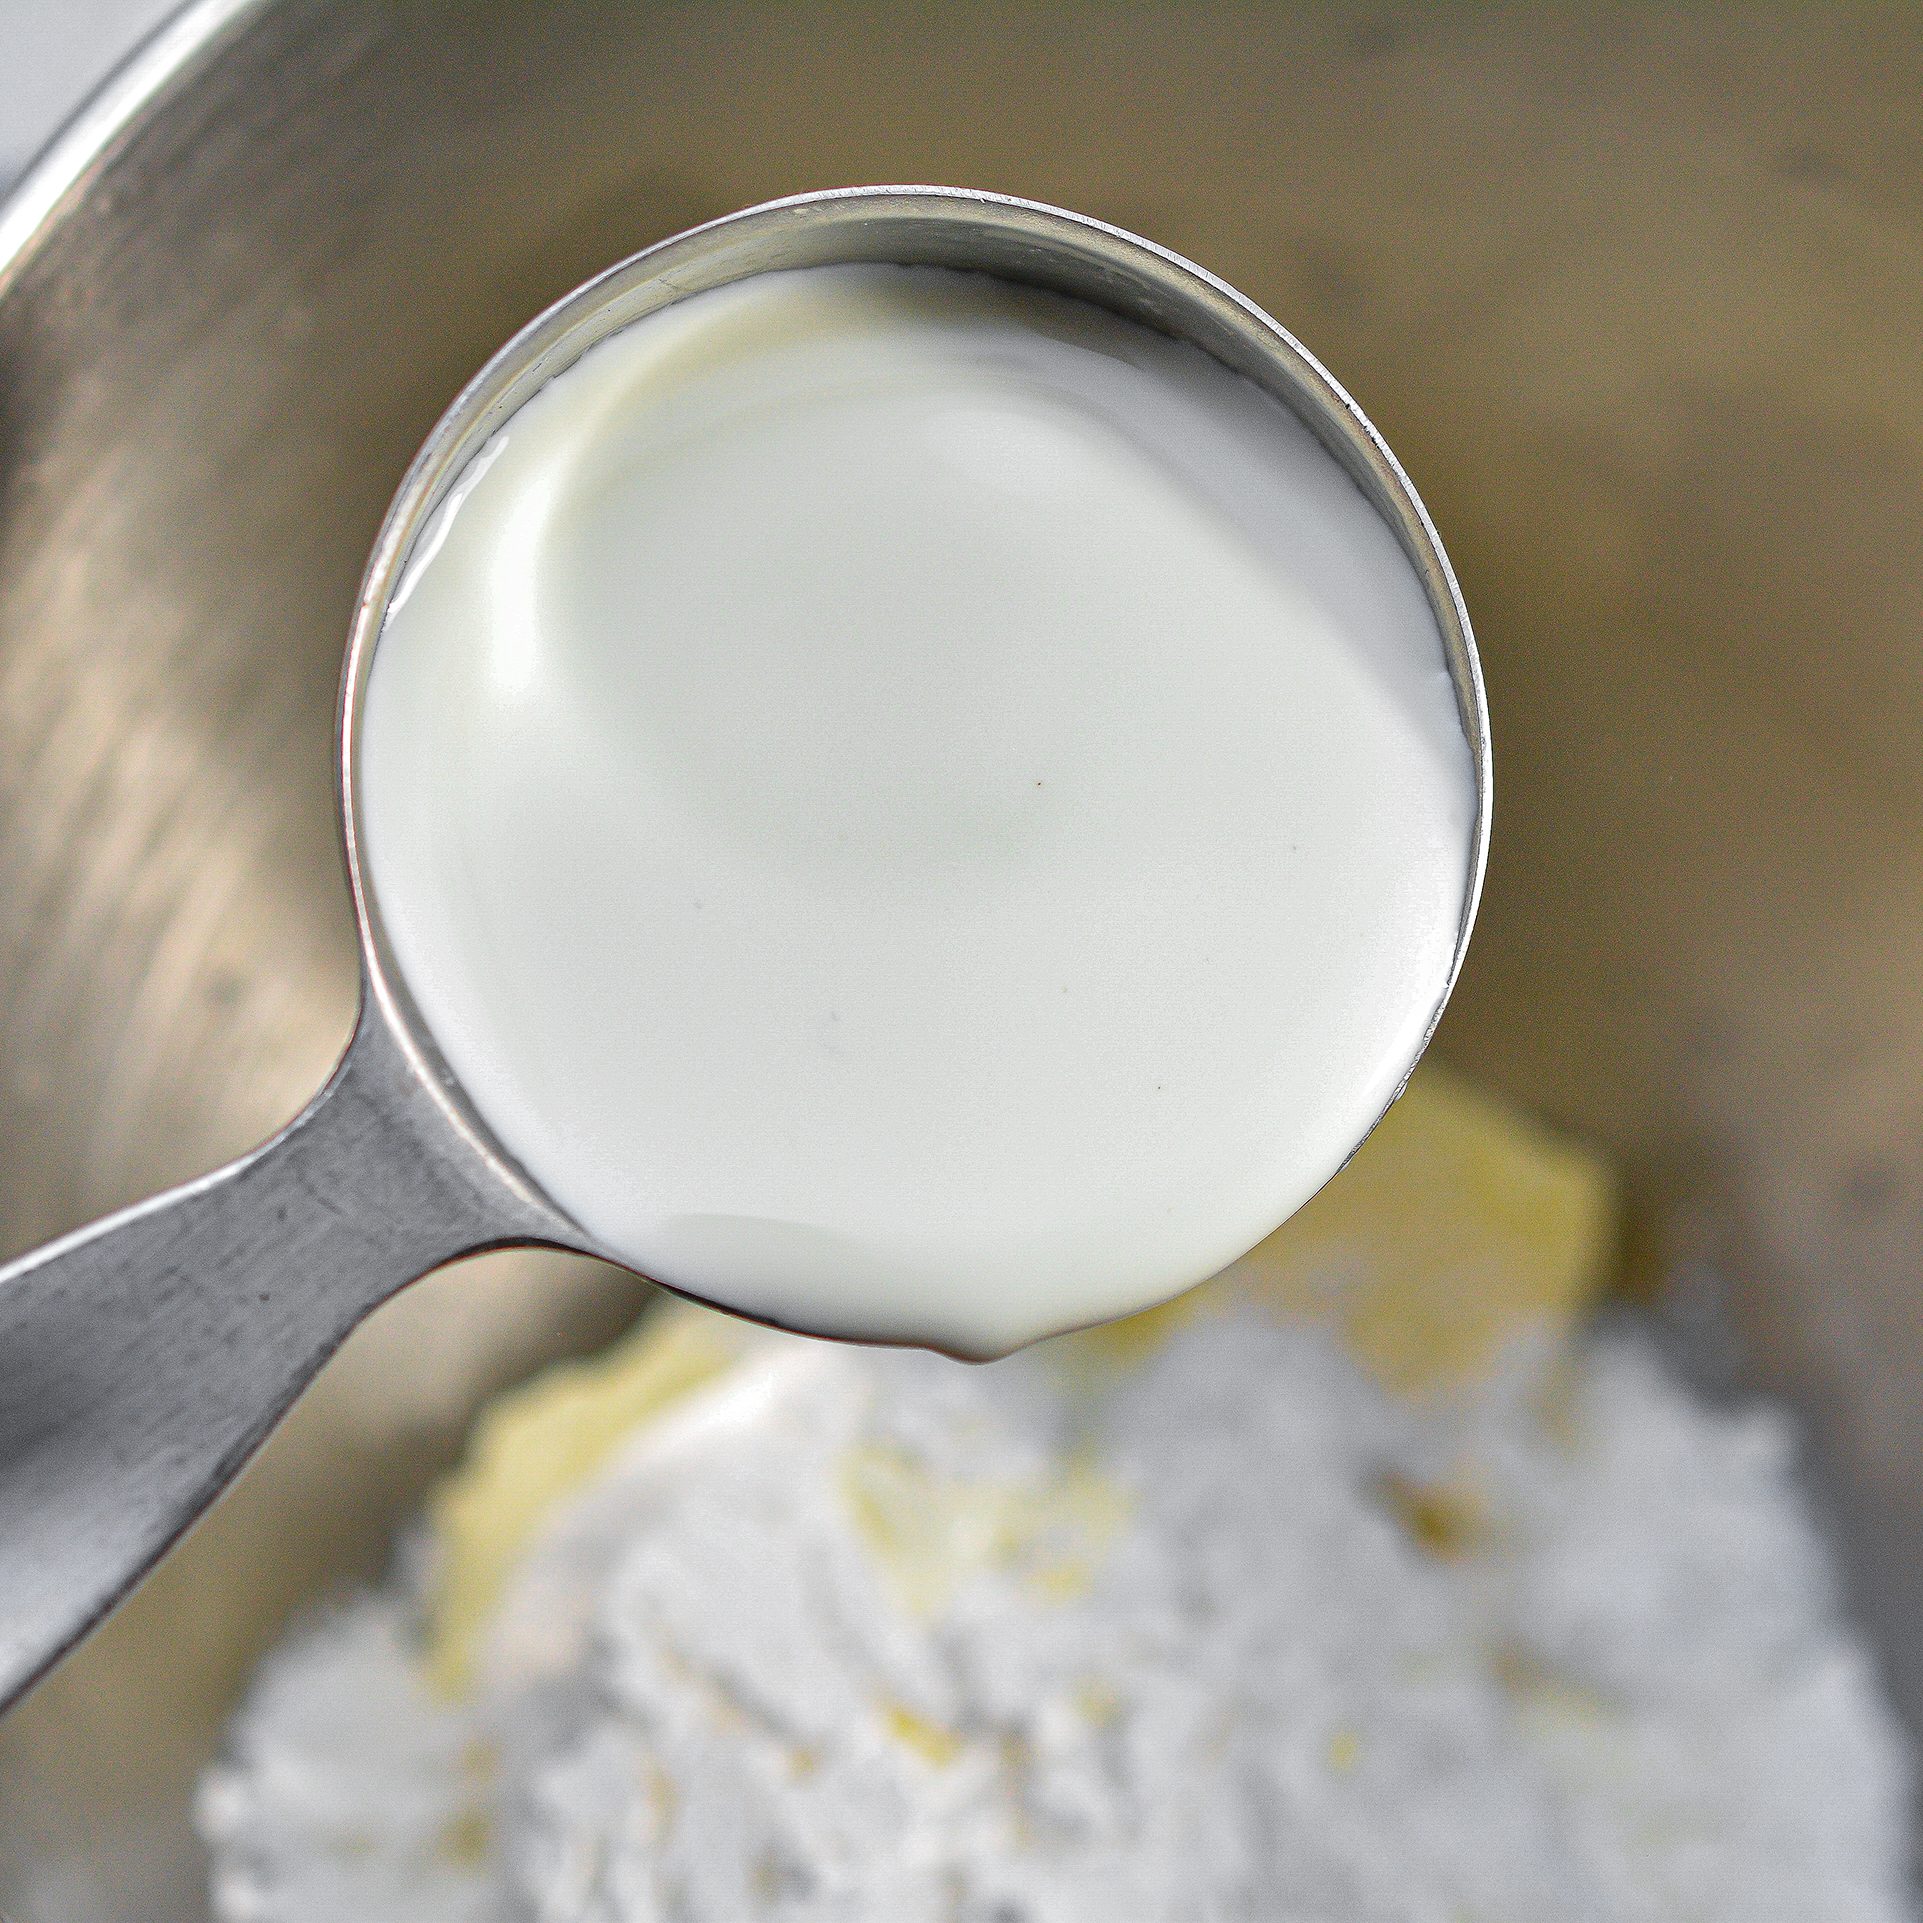 In a mixing bowl, combine the ingredients for the frosting until smooth and creamy.